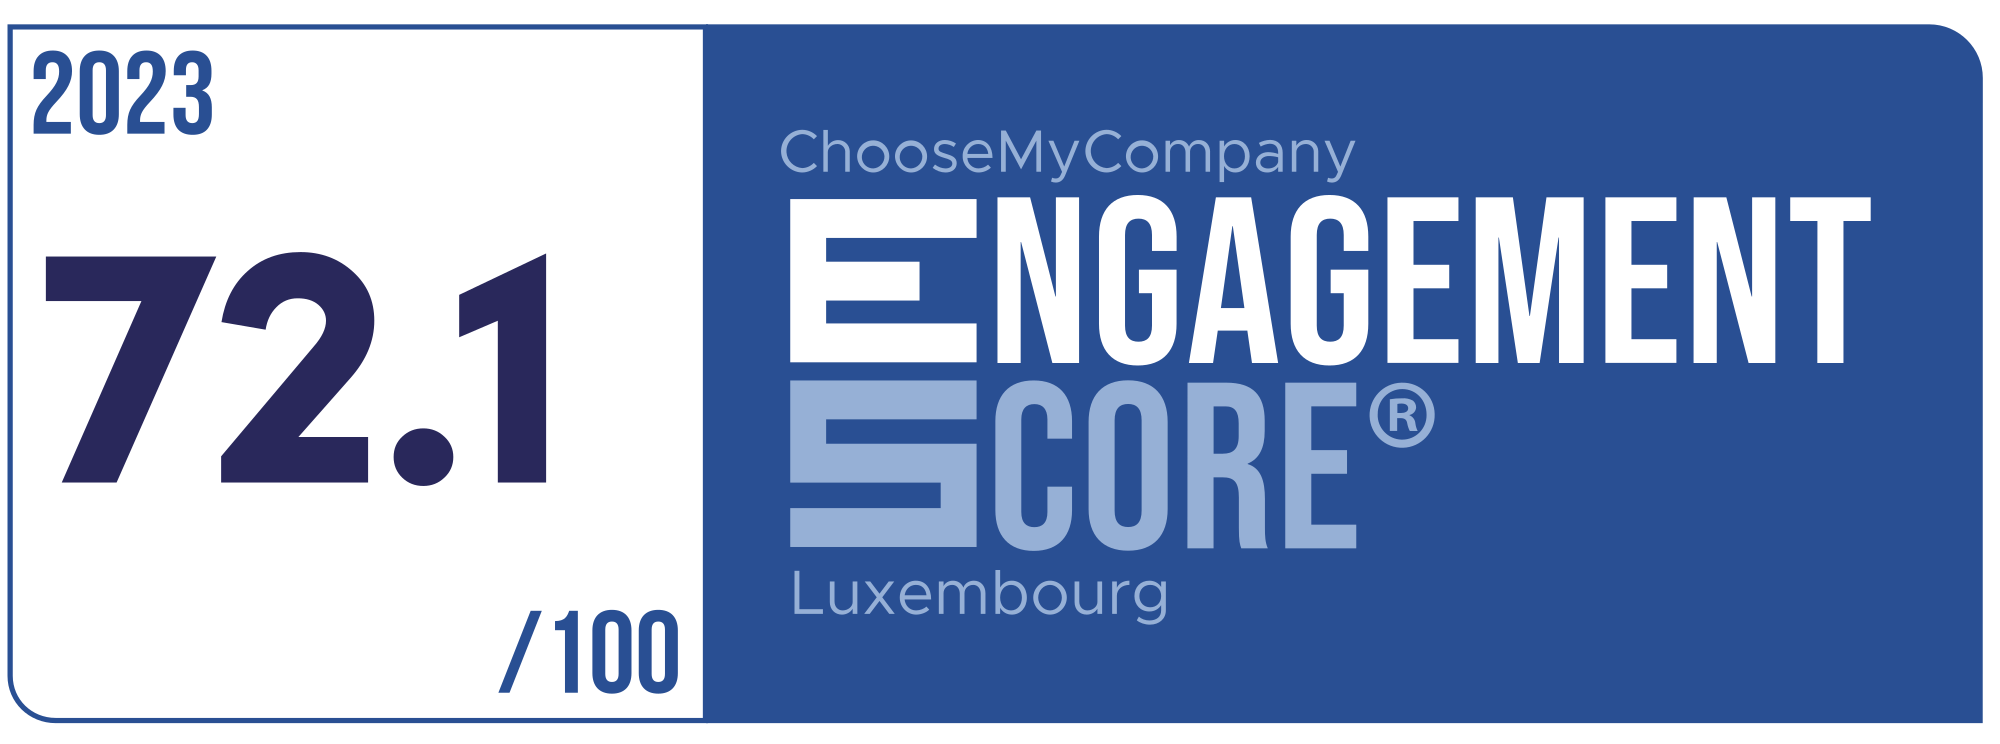 Label Engagement Score 2023 Luxembourg